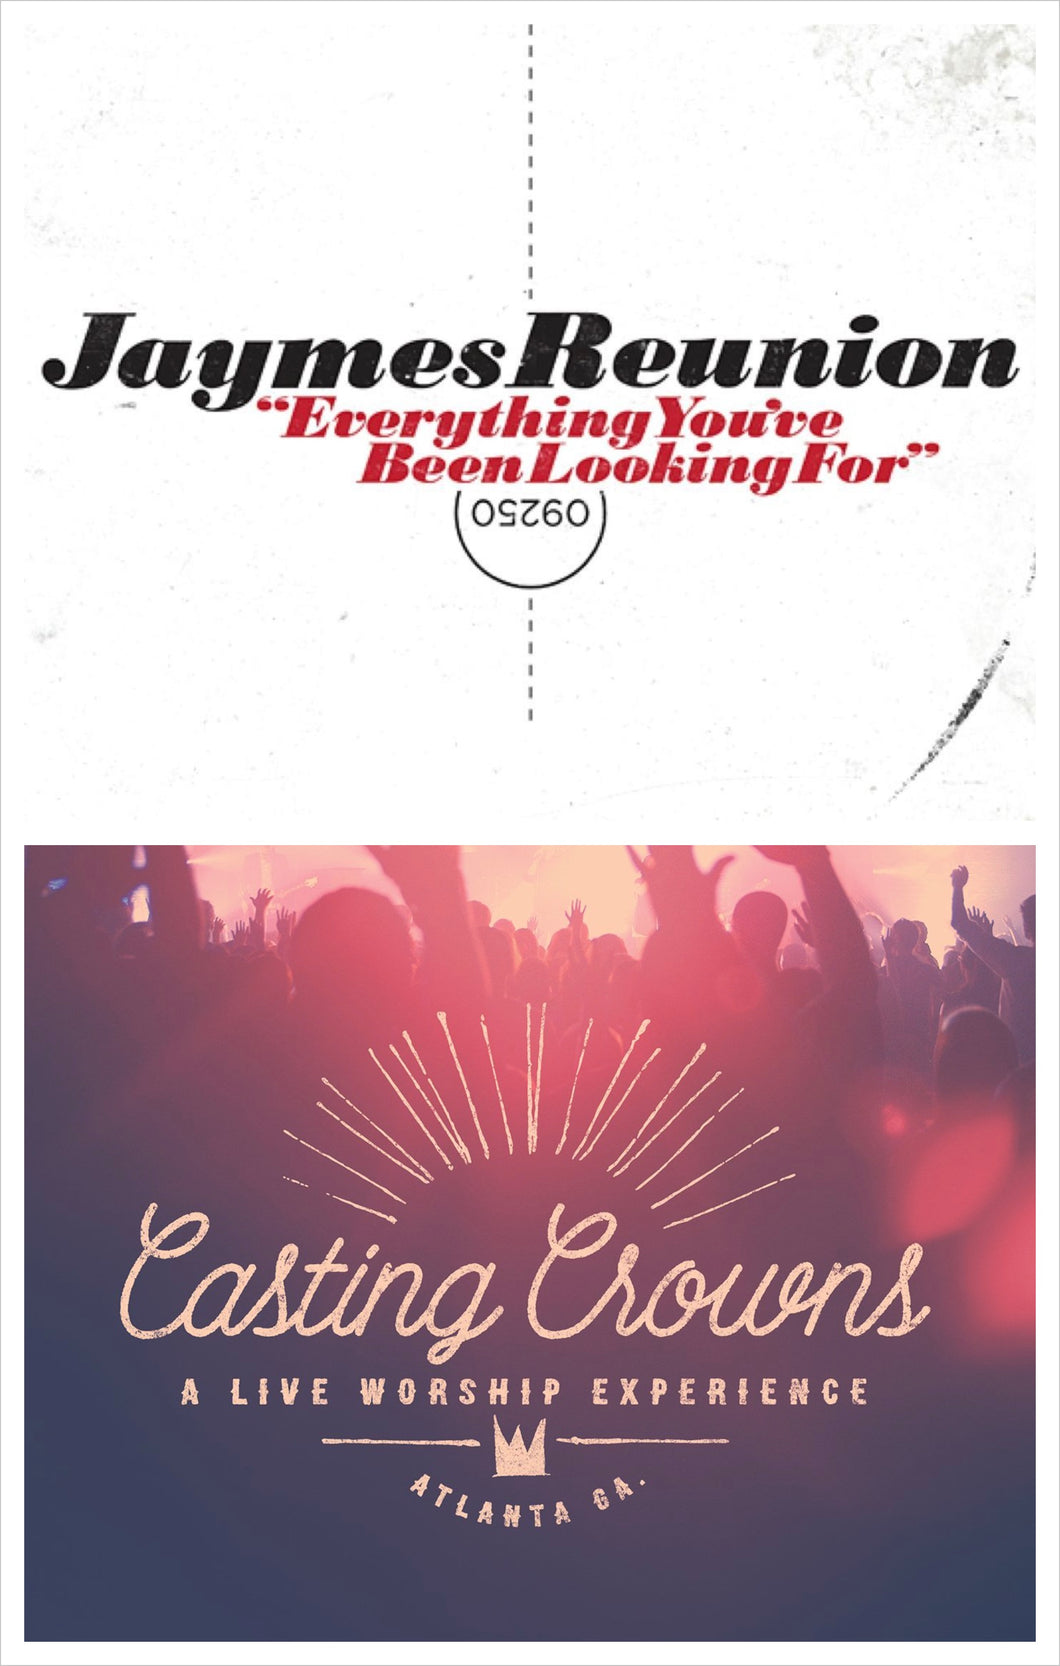 Jaymes Reunion Everything You've Been Looking For + Casting Crowns Live Worship 2CD